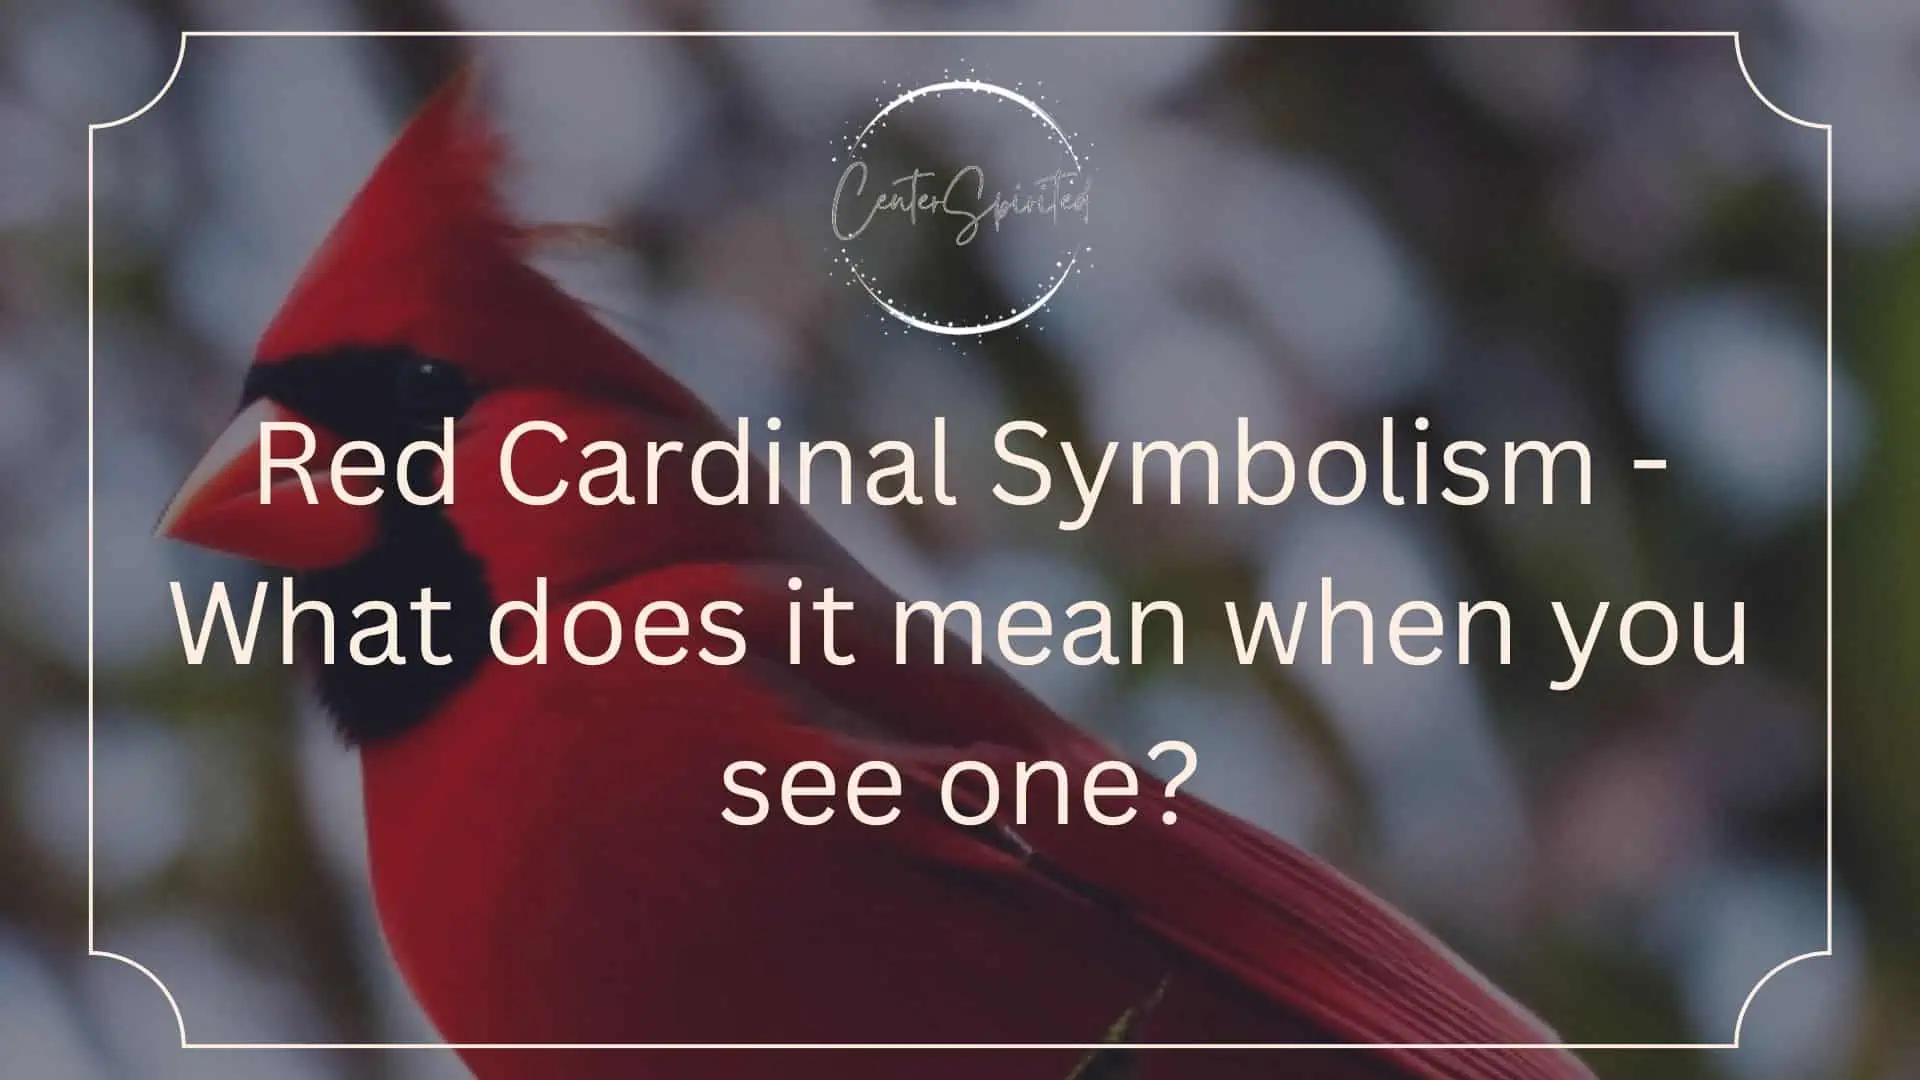 red-cardinal-symbolism-what-does-it-mean-when-you-see-one